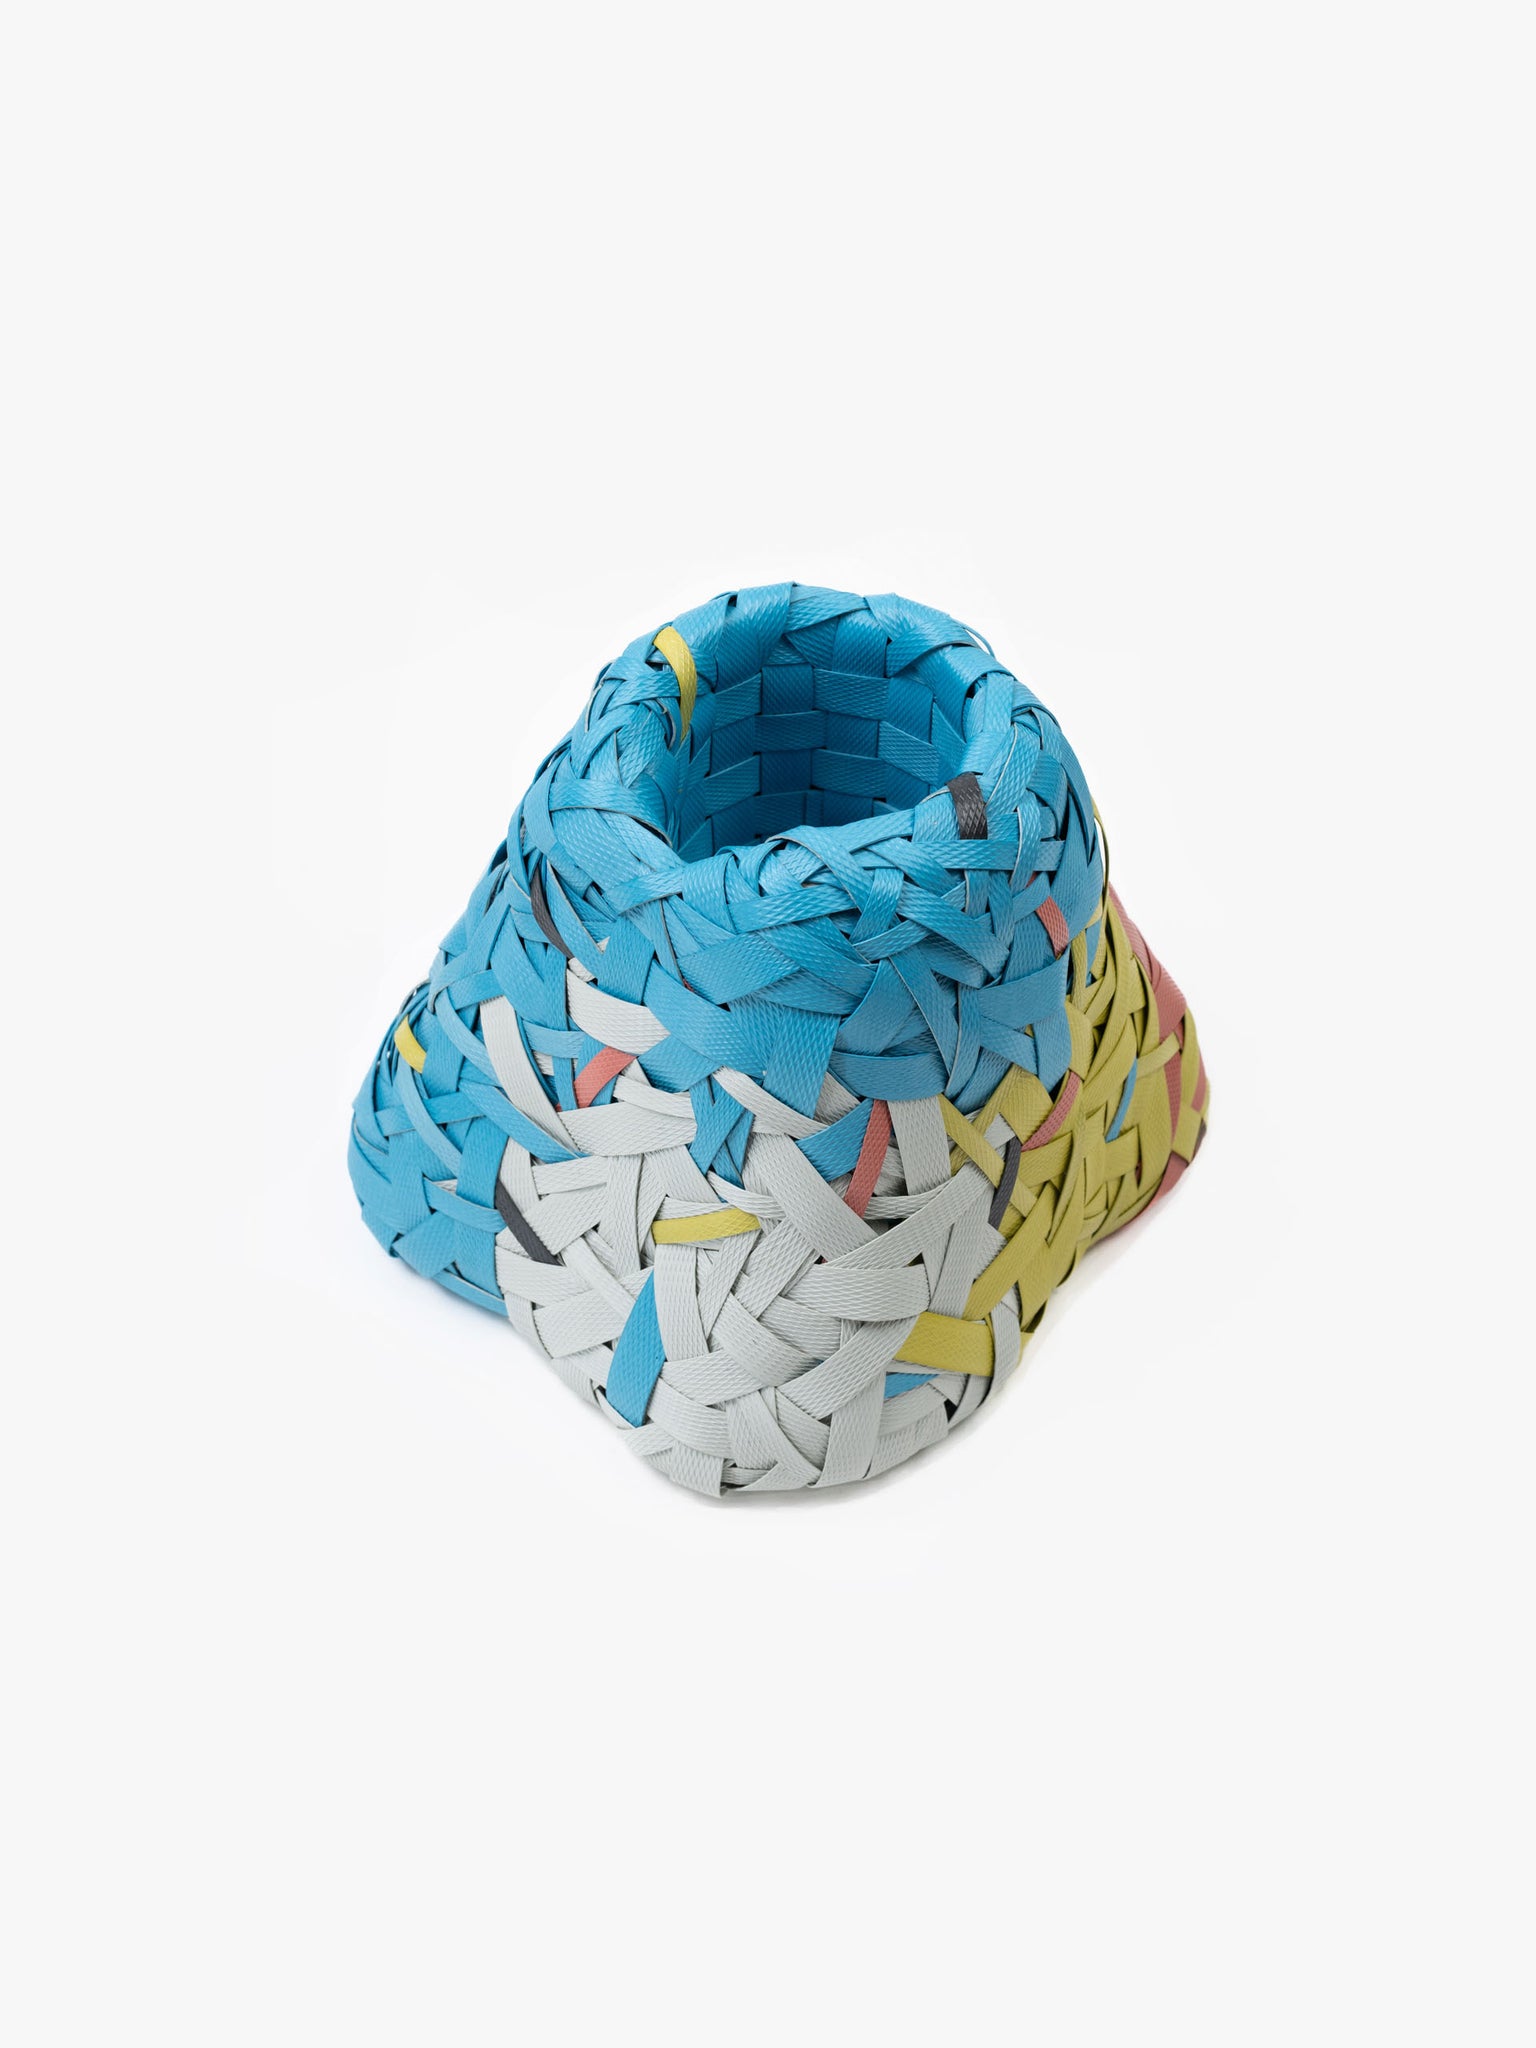 Recycled Plastic Woven Ecology Vase Multicolour